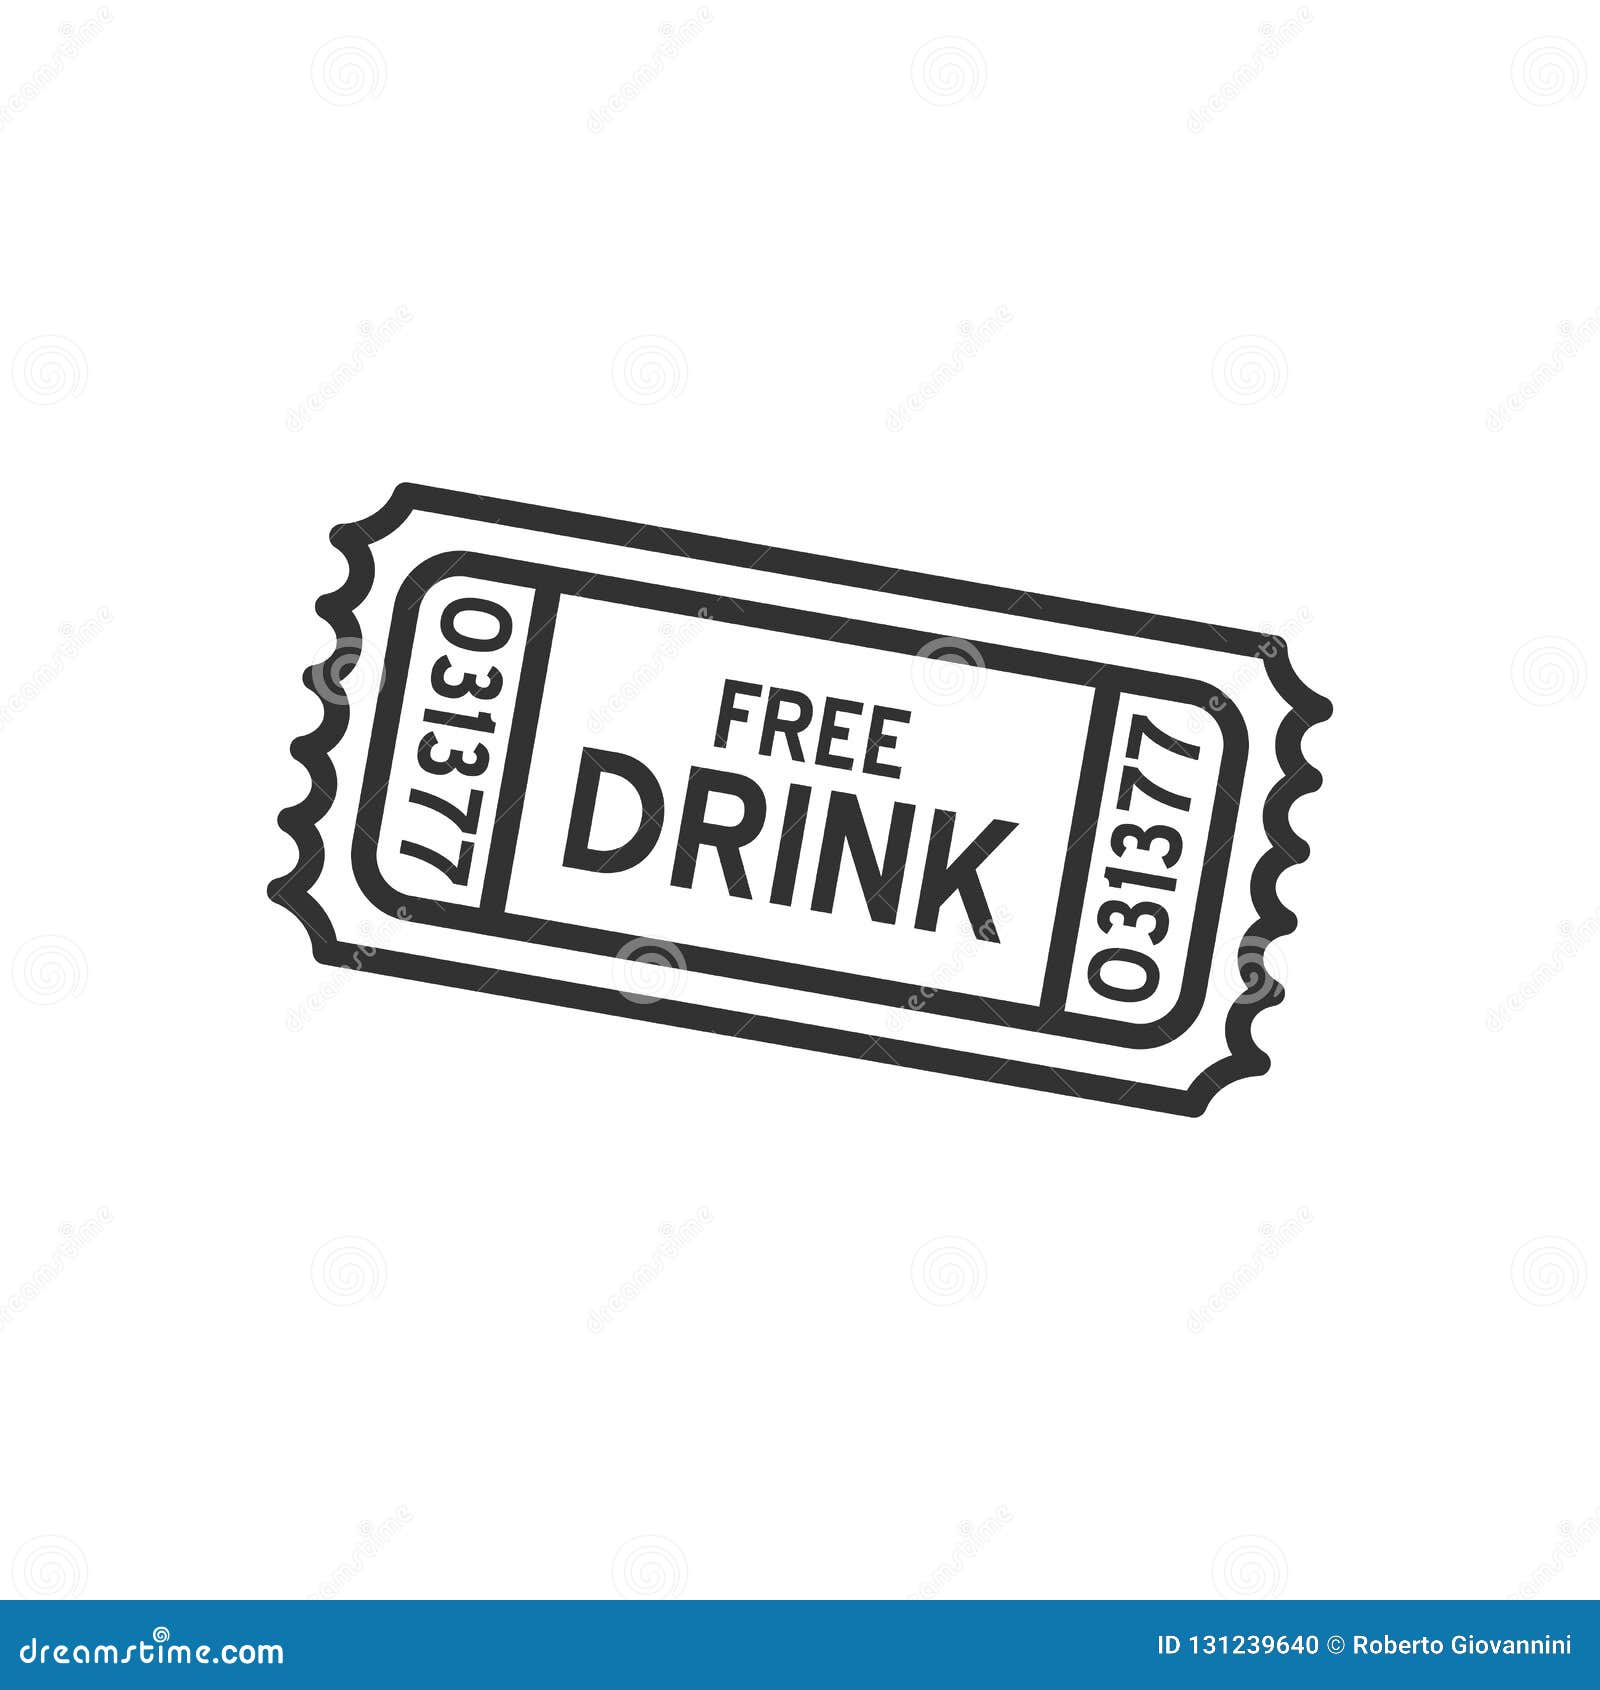 free drink ticket outline flat icon on white